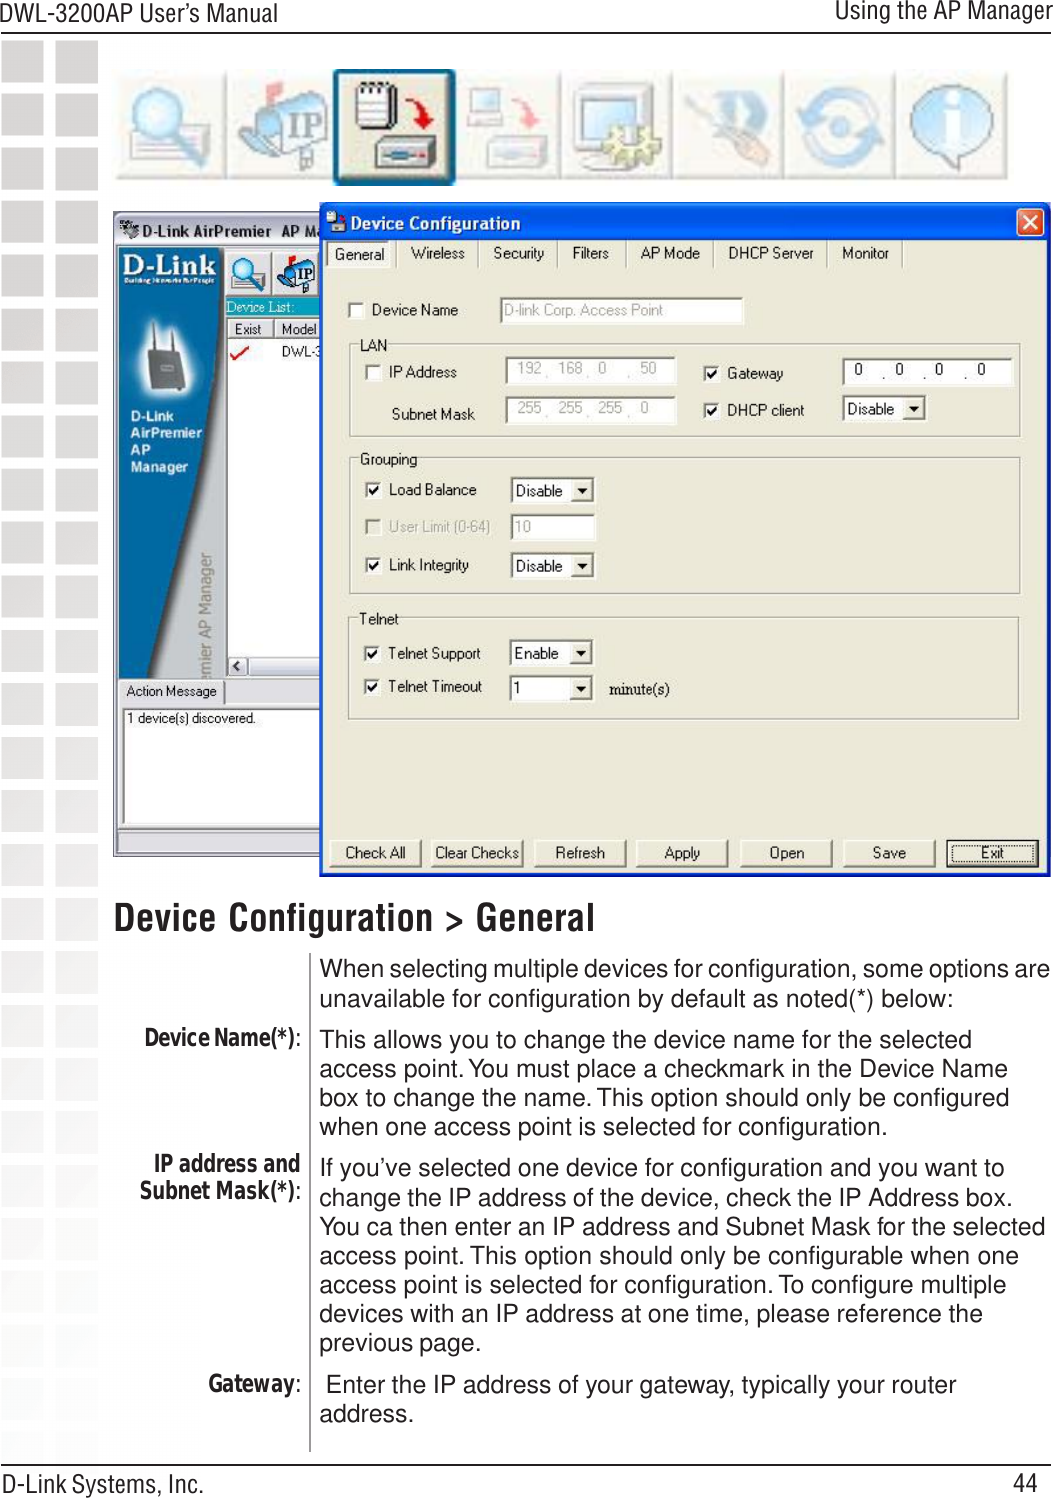 44DWL-3200AP User’s ManualD-Link Systems, Inc.Using the AP ManagerWhen selecting multiple devices for configuration, some options areunavailable for configuration by default as noted(*) below:This allows you to change the device name for the selectedaccess point. You must place a checkmark in the Device Namebox to change the name. This option should only be configuredwhen one access point is selected for configuration.If you’ve selected one device for configuration and you want tochange the IP address of the device, check the IP Address box.You ca then enter an IP address and Subnet Mask for the selectedaccess point. This option should only be configurable when oneaccess point is selected for configuration. To configure multipledevices with an IP address at one time, please reference theprevious page. Enter the IP address of your gateway, typically your routeraddress.Device Configuration &gt; GeneralDevice Name(*):IP address andSubnet Mask(*):Gateway: